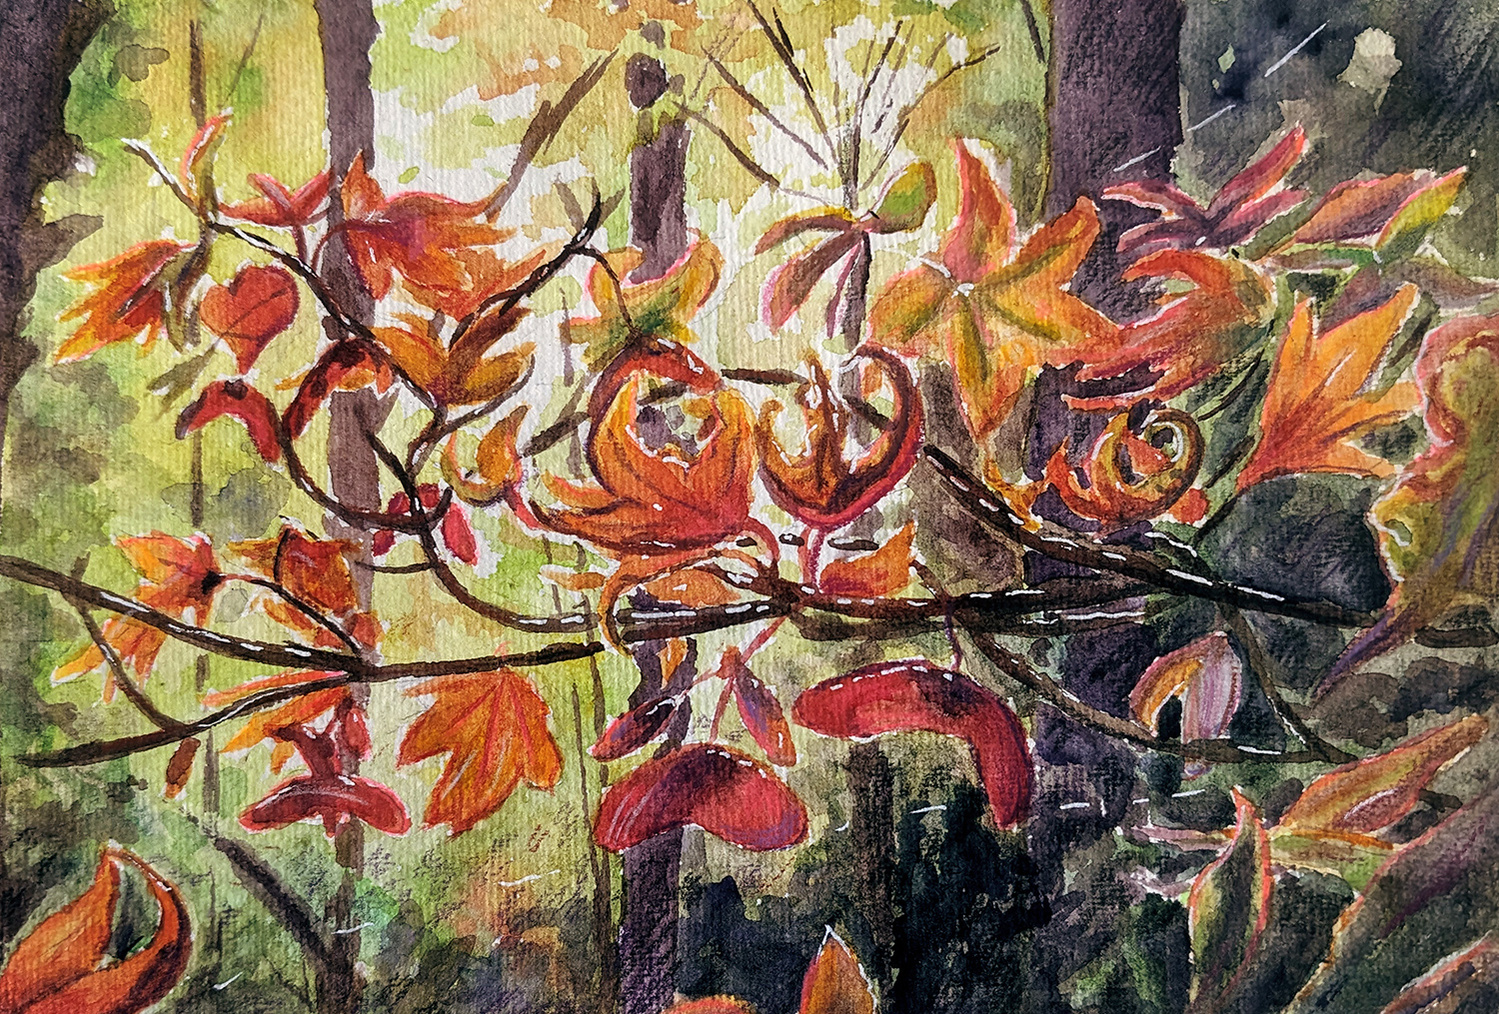 A painting of leaves with warm hues of red and orange and gold. Light shines through them from behind as seen through the hazy golden forest in the background.